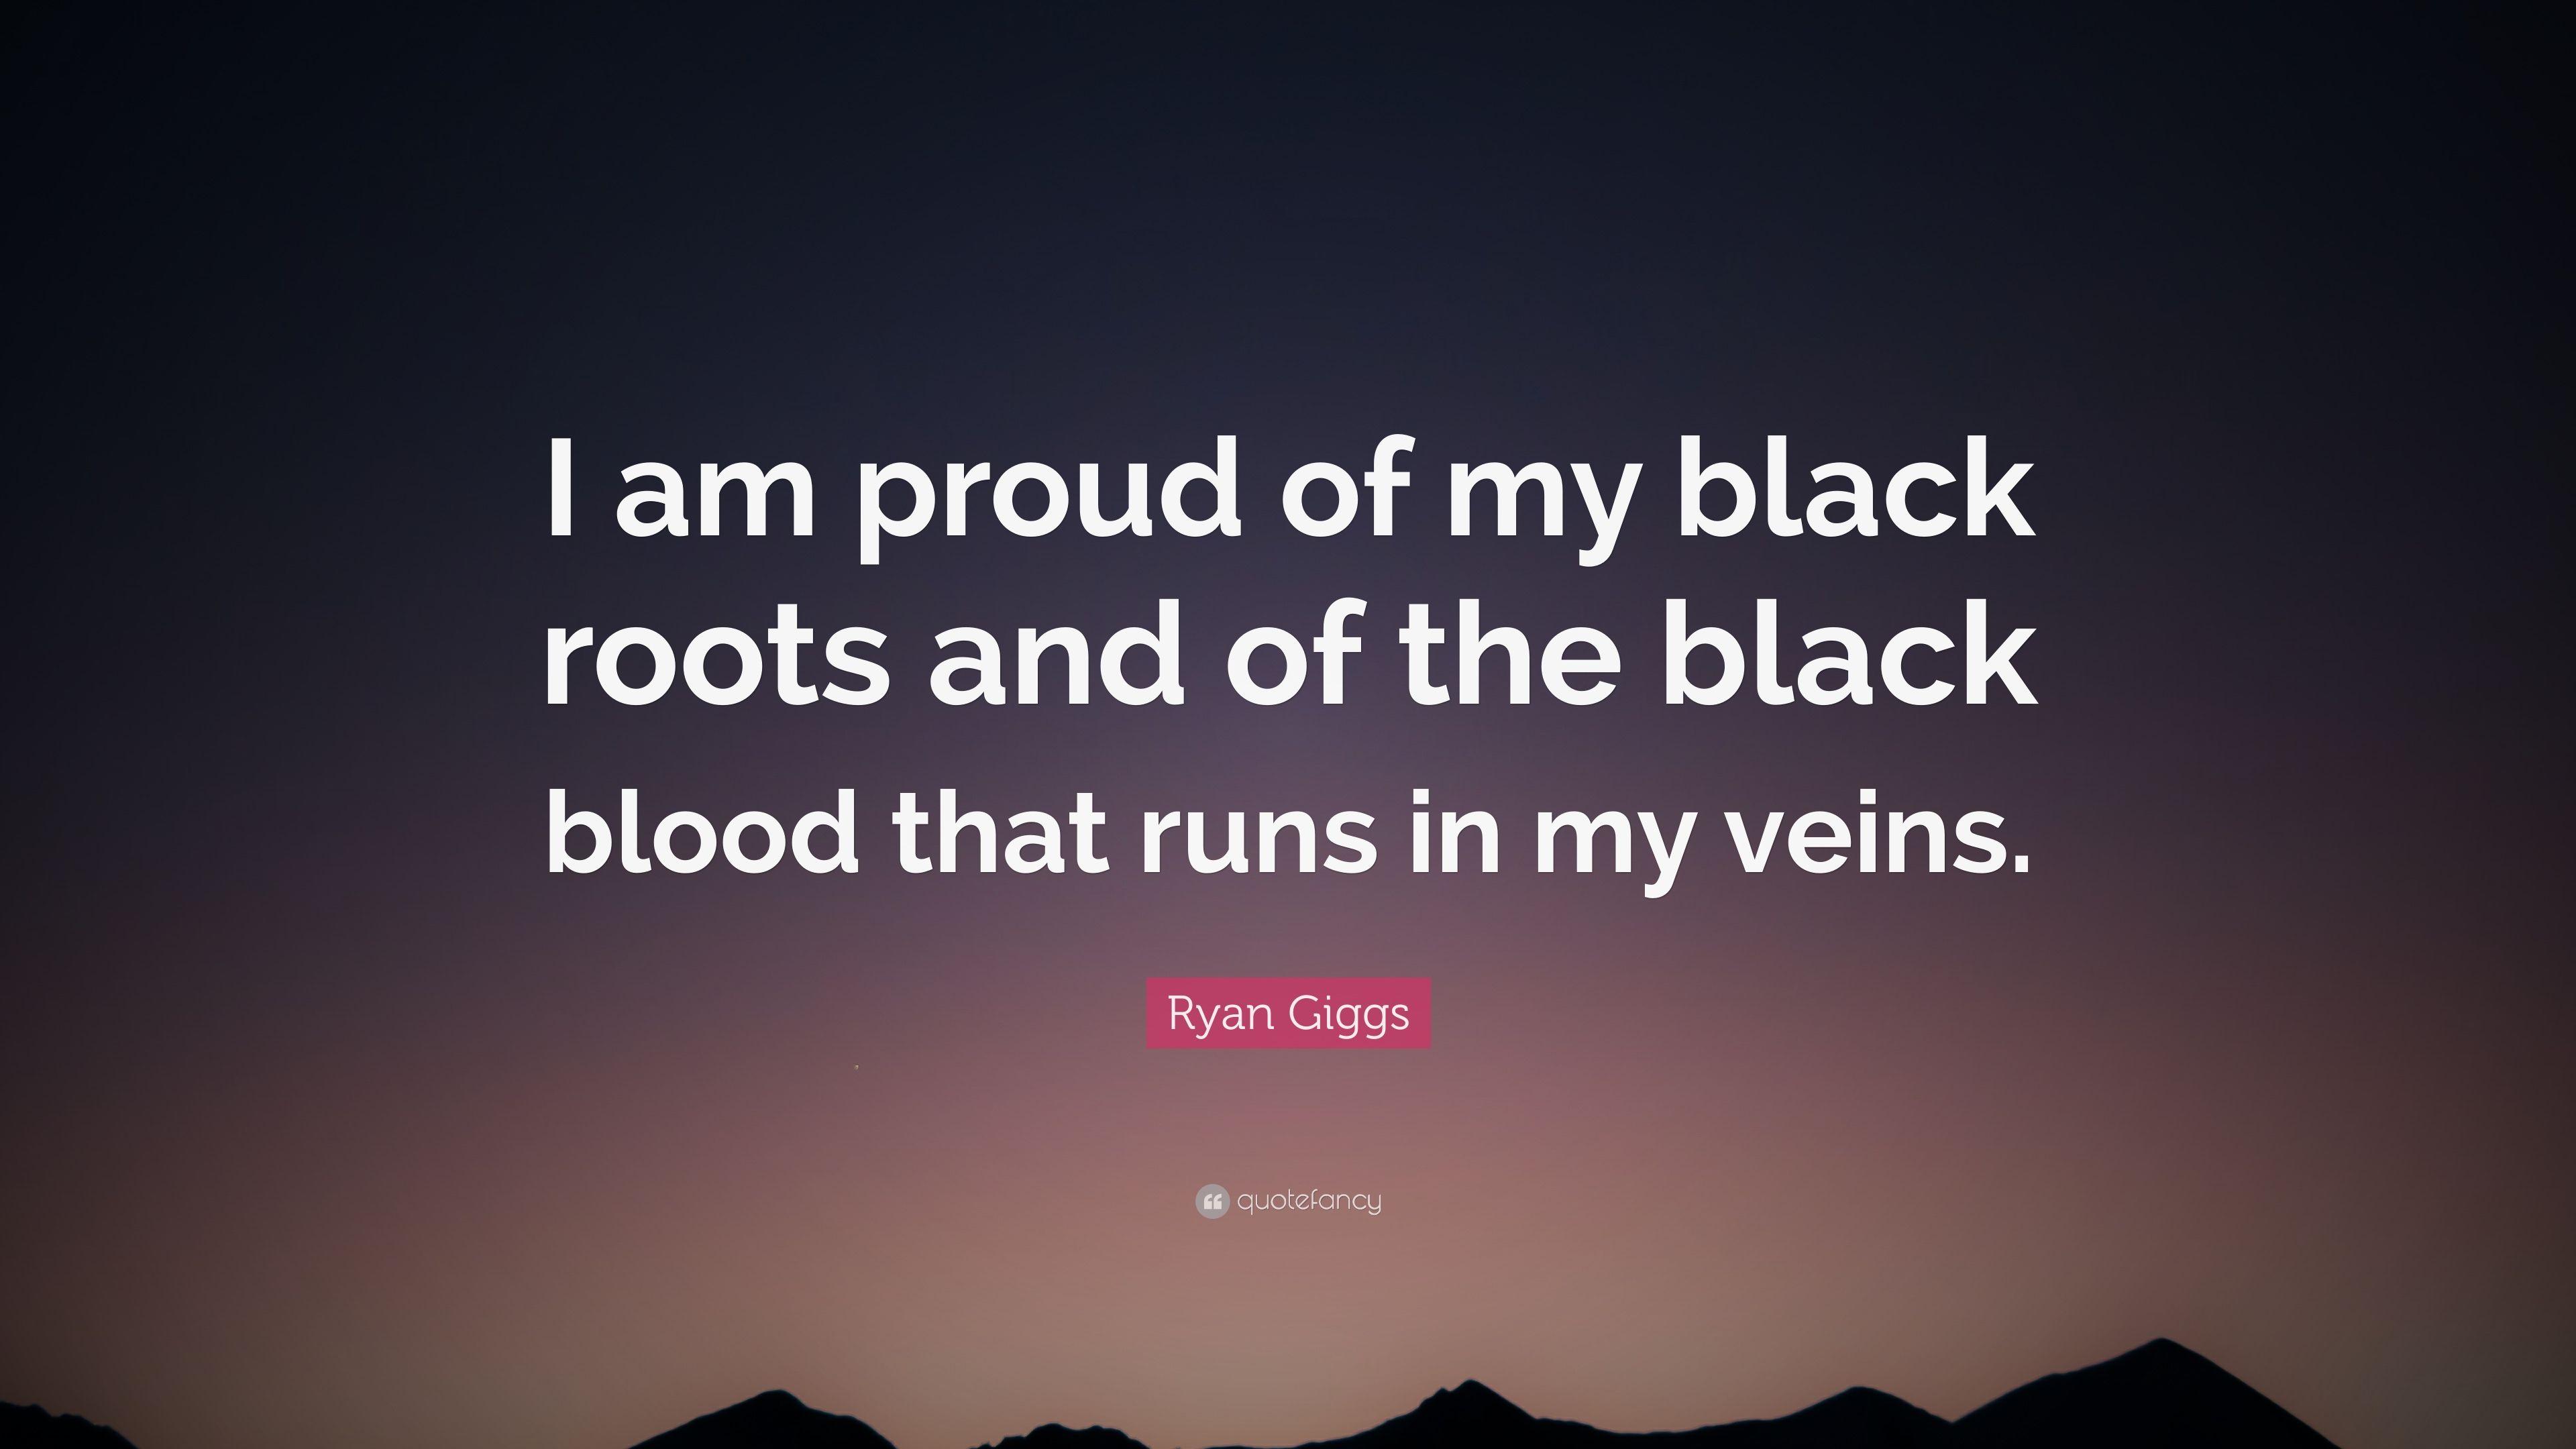 Ryan Giggs Quote: “I am proud of my black roots and of the black